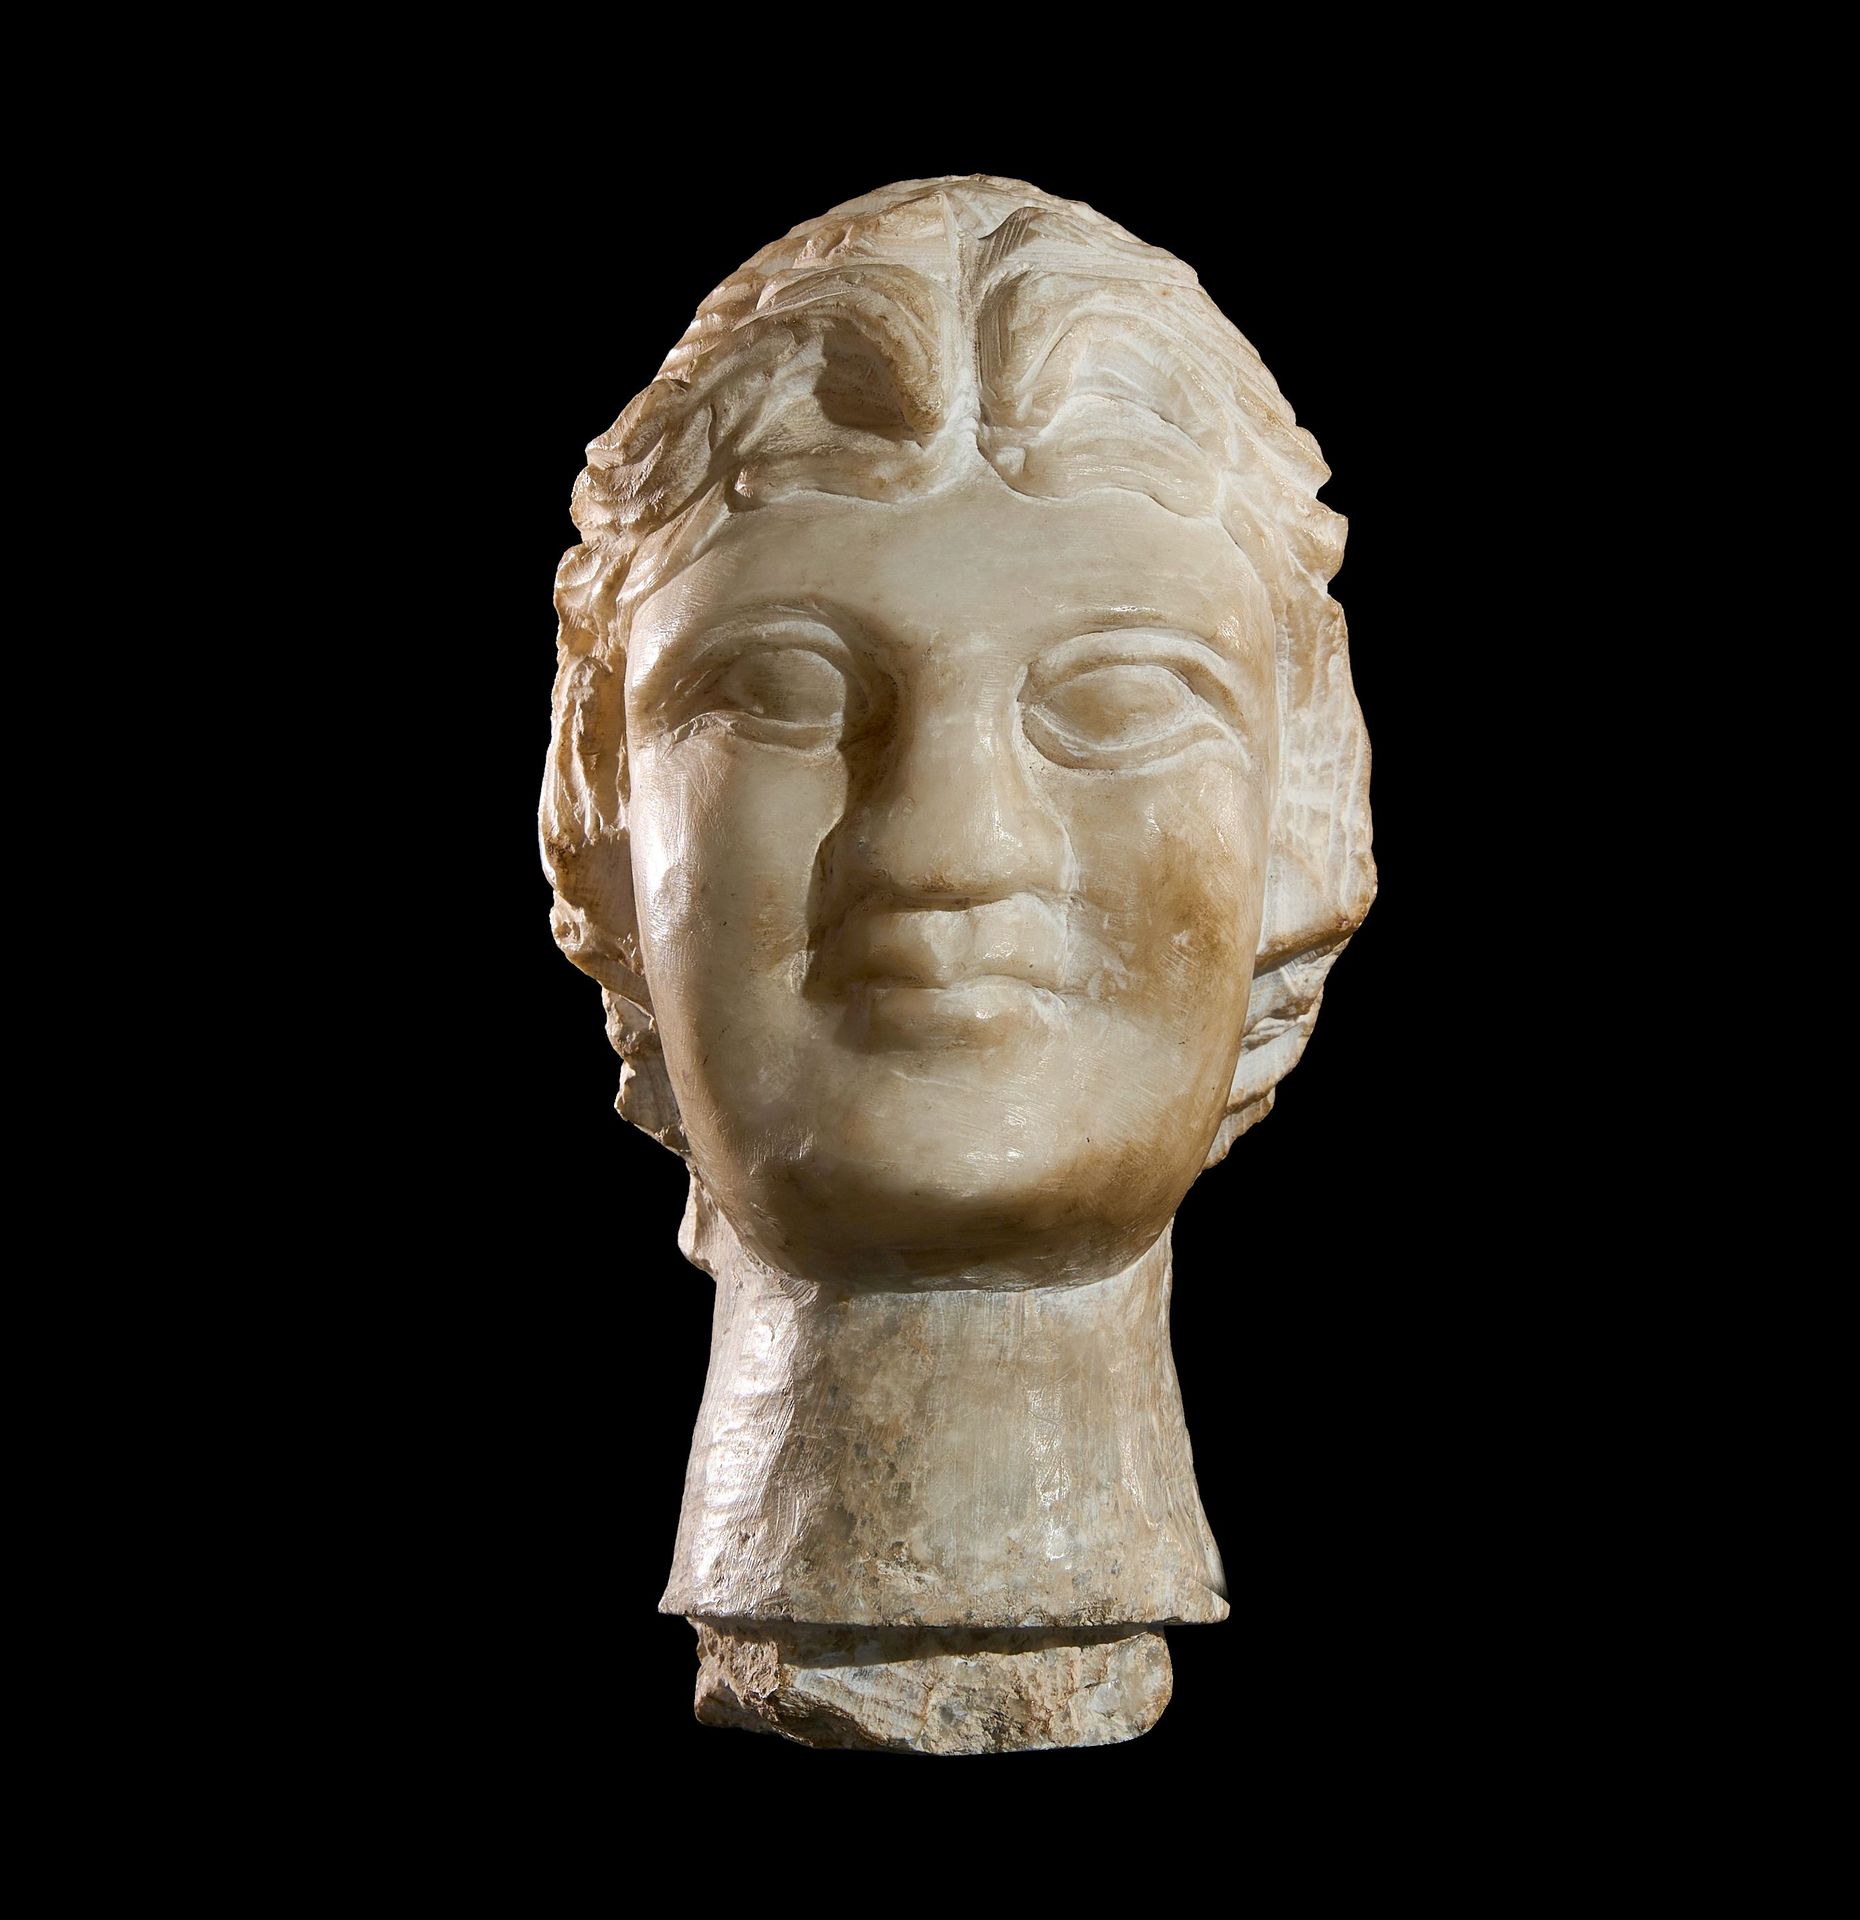 A ROMAN MARBLE BUST OF A YOUNG MAN, CIRCA 3-5TH CENTURY A.D. BUSTO DI GIOVANE UO&hellip;